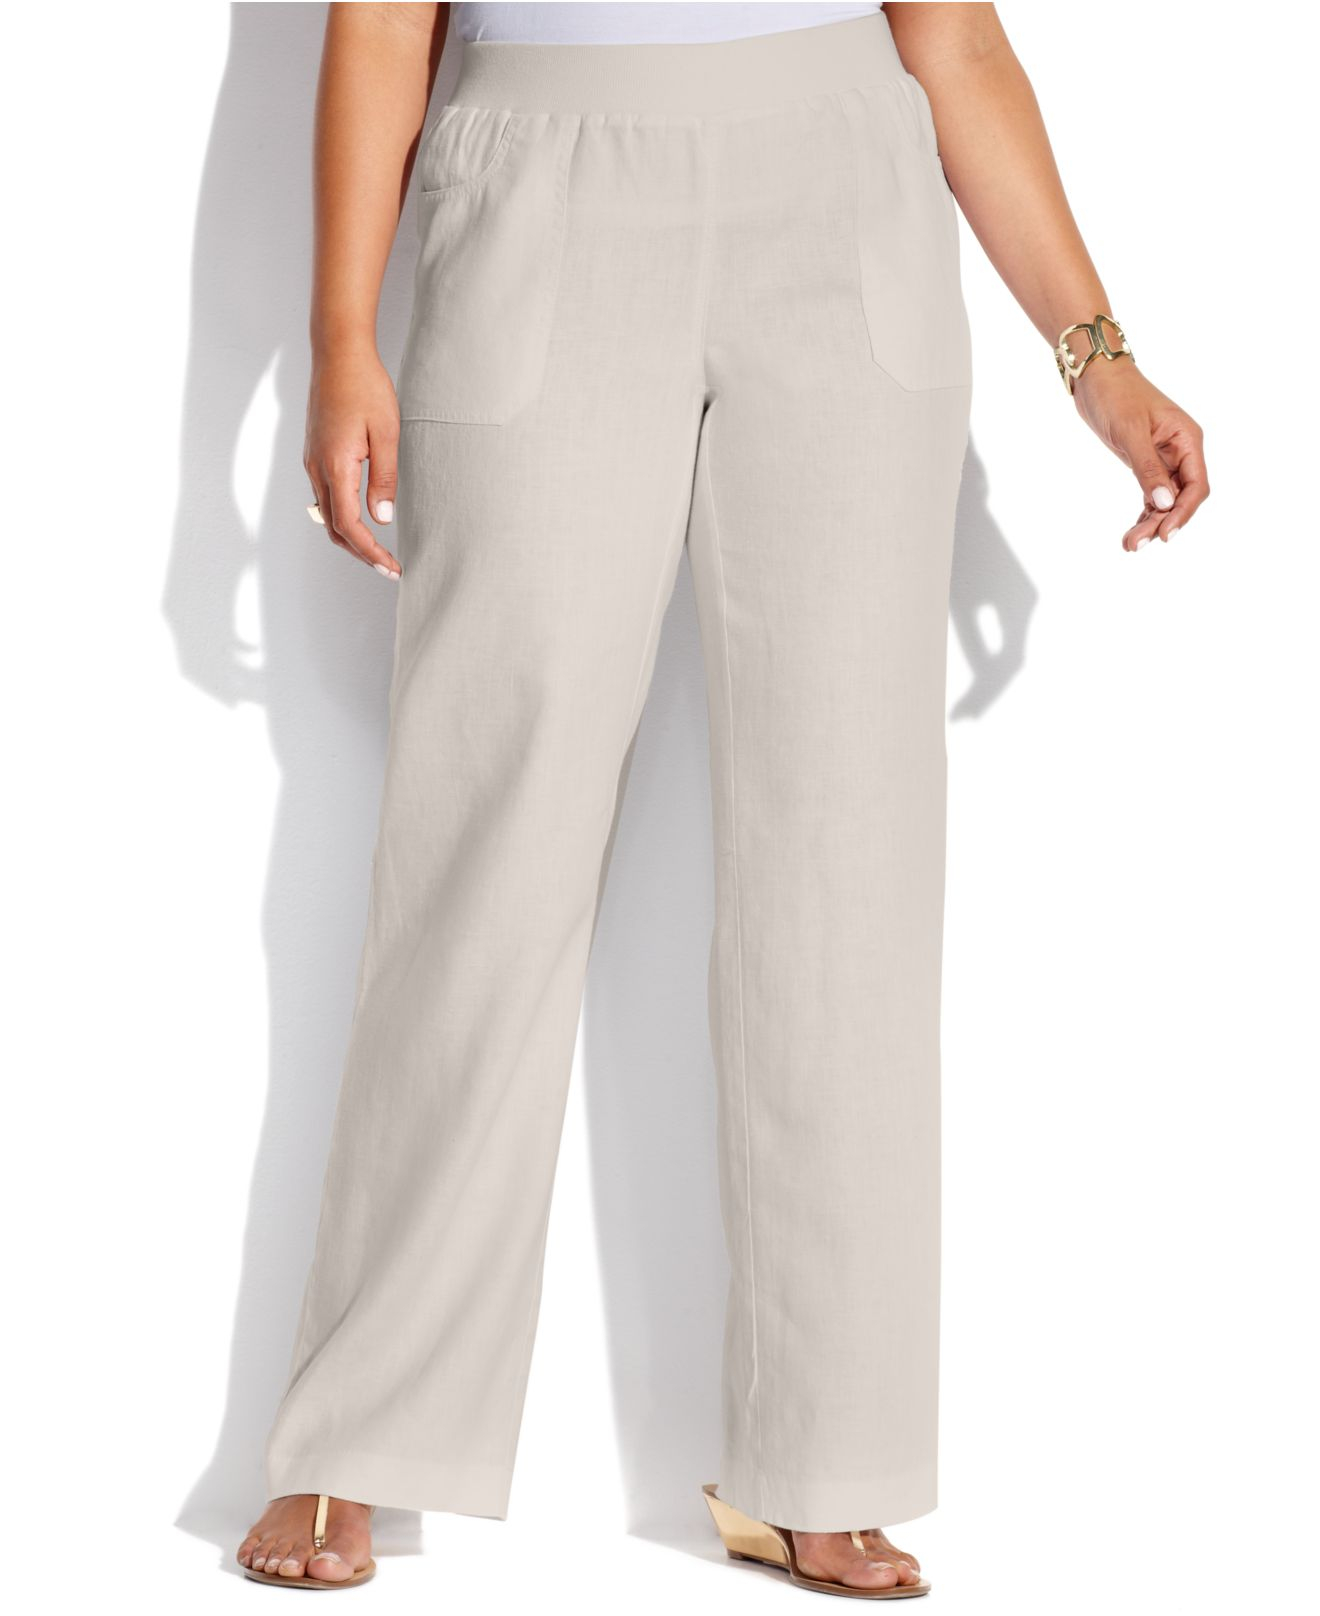 Lyst - Inc International Concepts Plus Size Wideleg Linen Pants in White